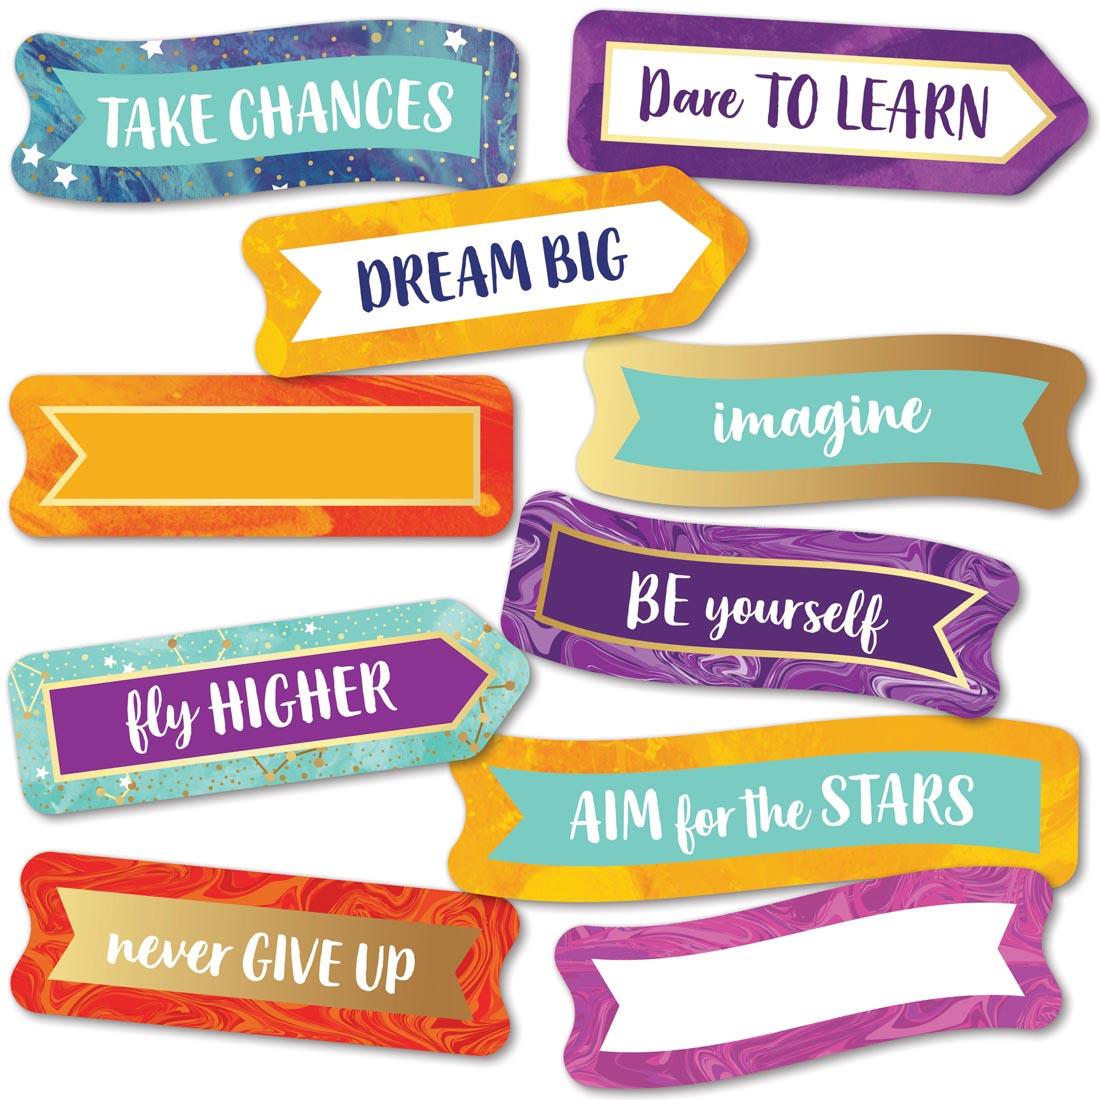 Recognition Award Mini Colorful Cut-Outs with sayings like Take Chances, Dare to Learn and Be Yourself